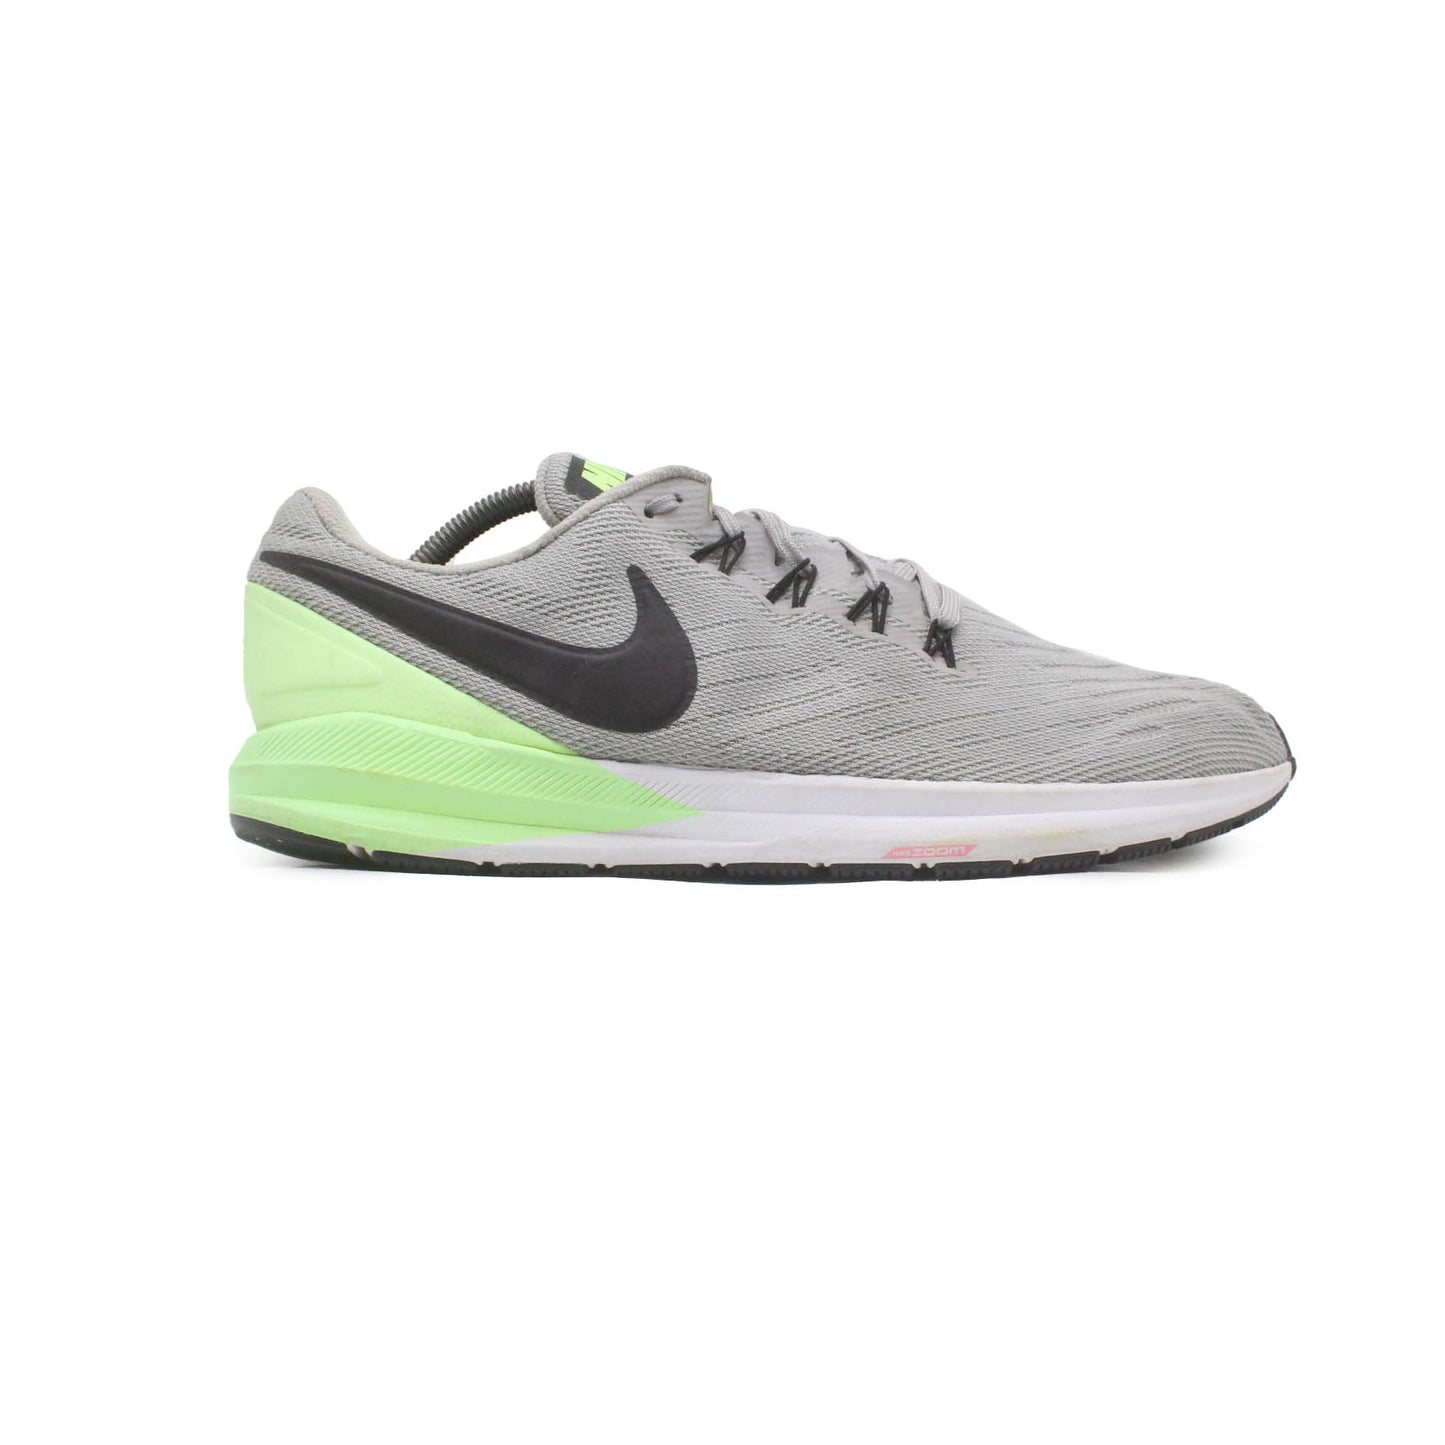 Nike Air Zoom Structure 22 Running Shoe